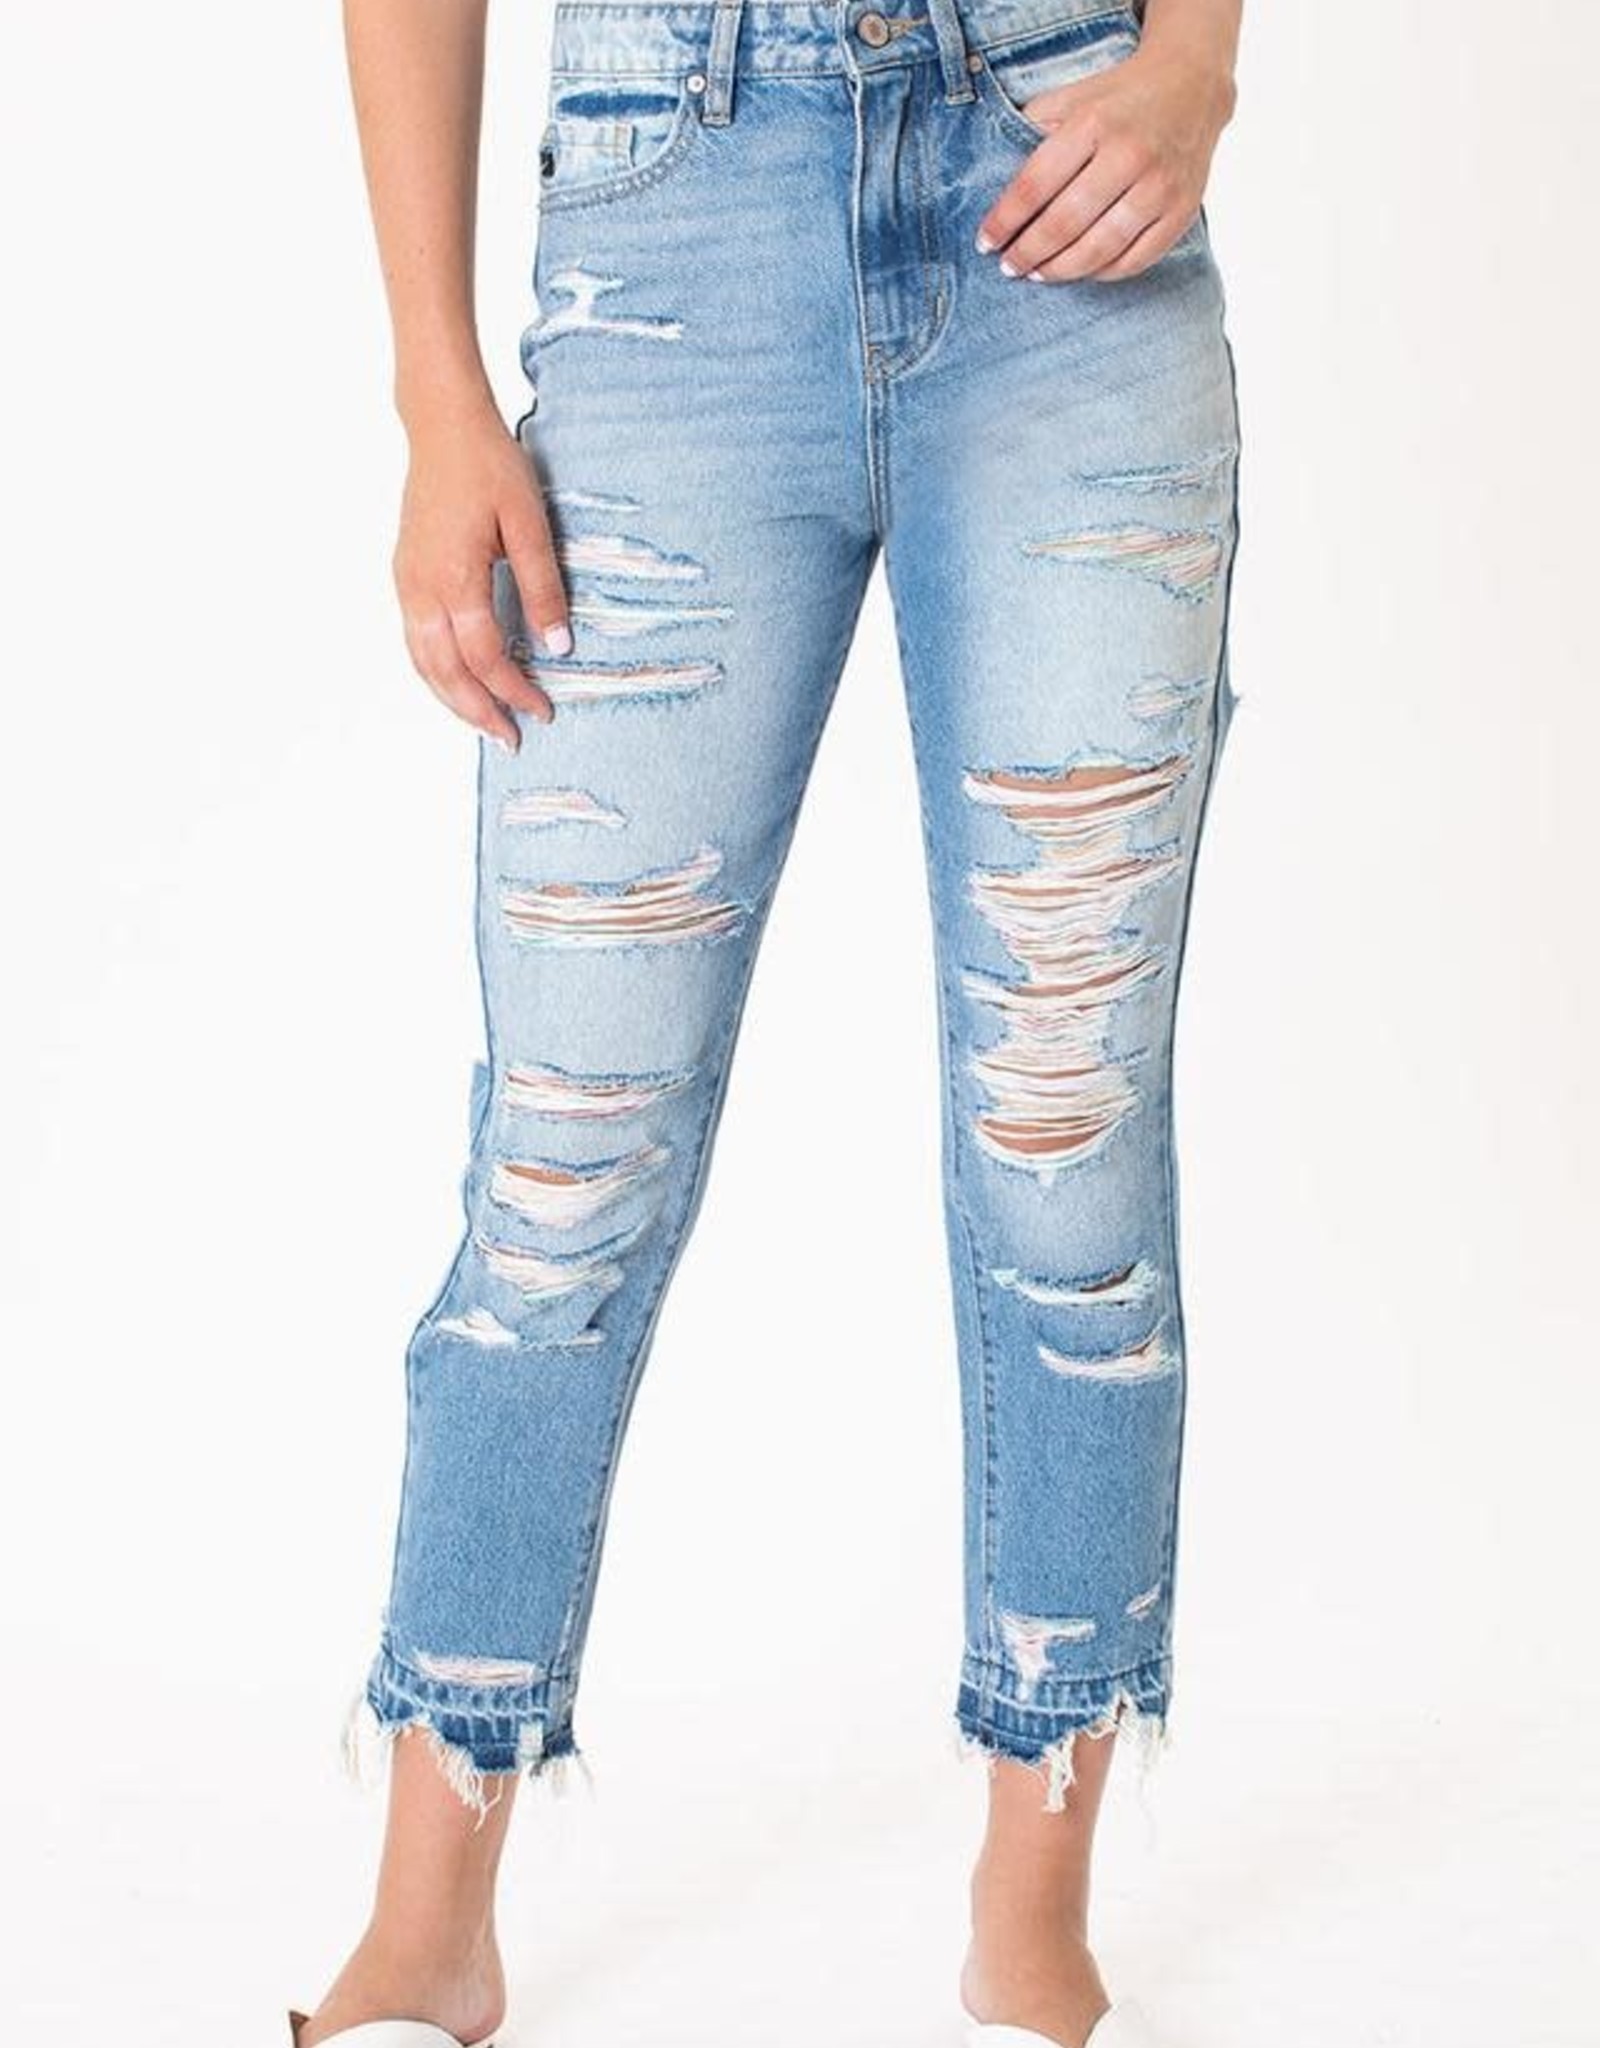 Kan Can USA High Rise Distressed Classic Skinny Jeans - KC9224L